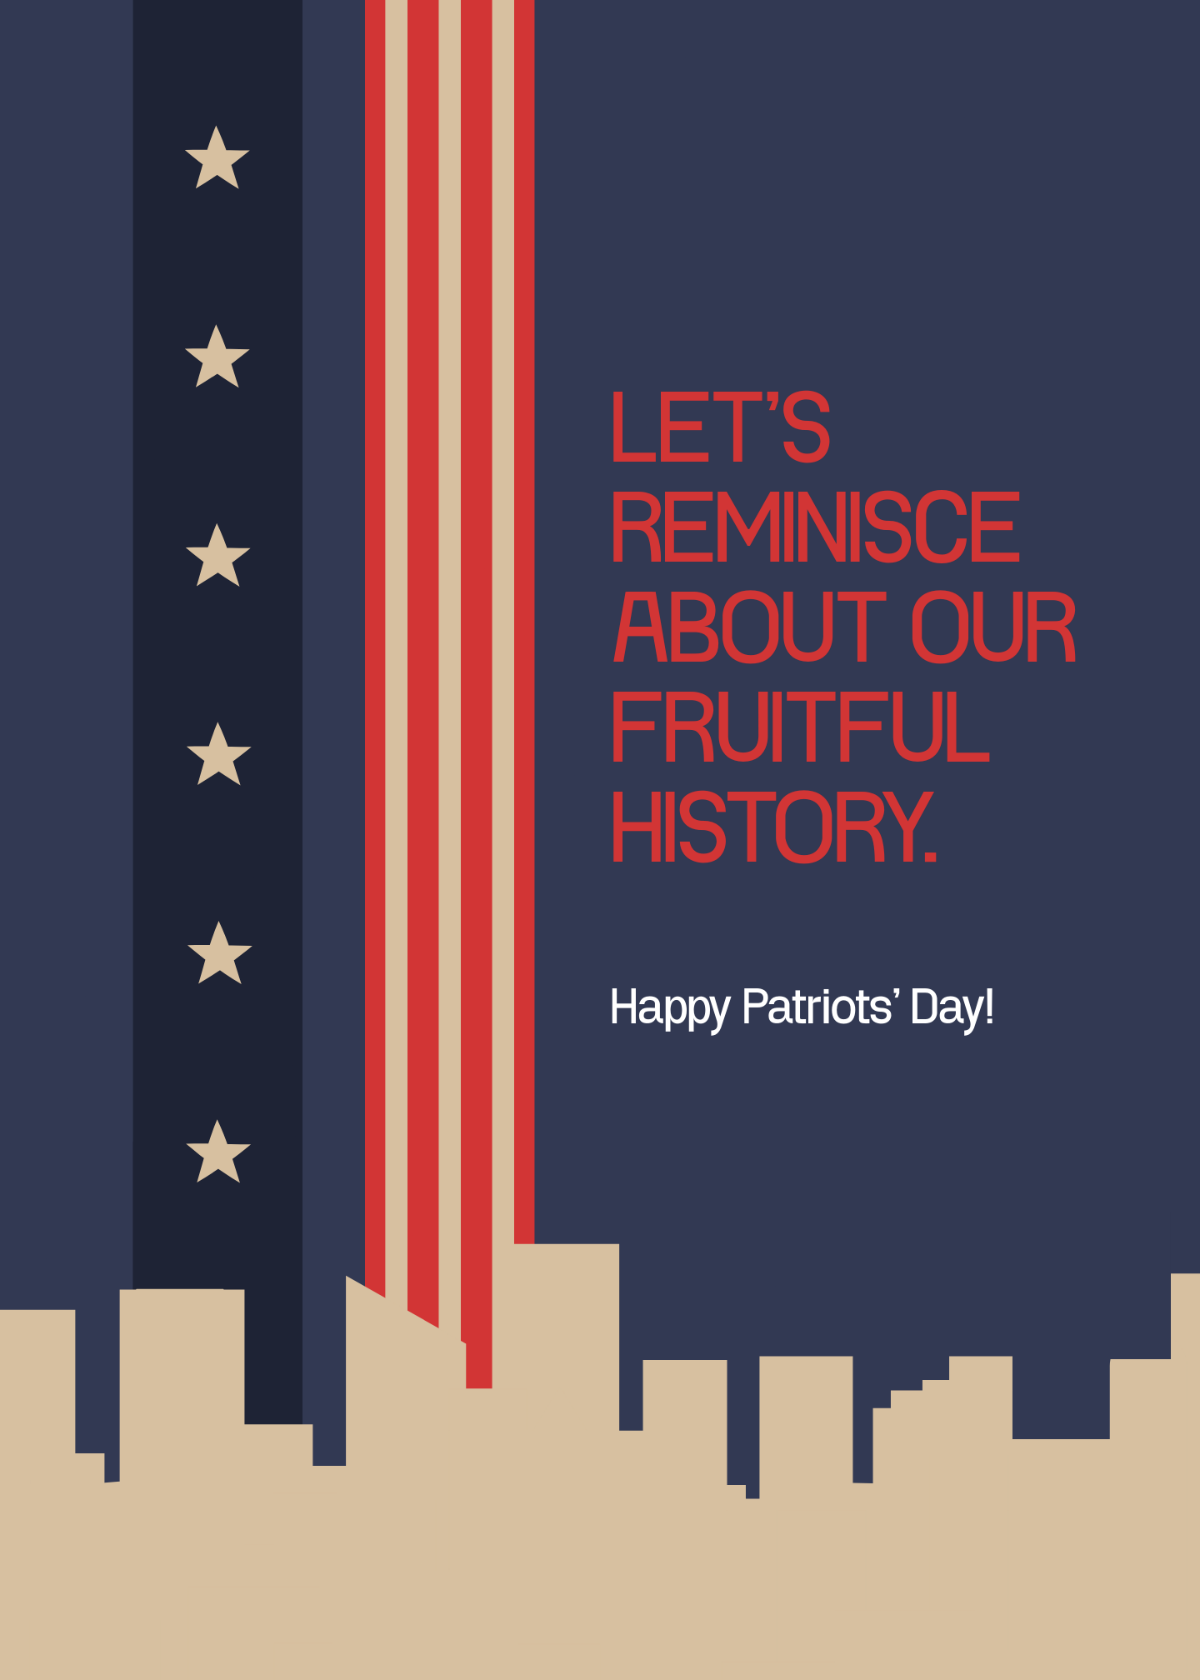 Patriots' Day Message Template